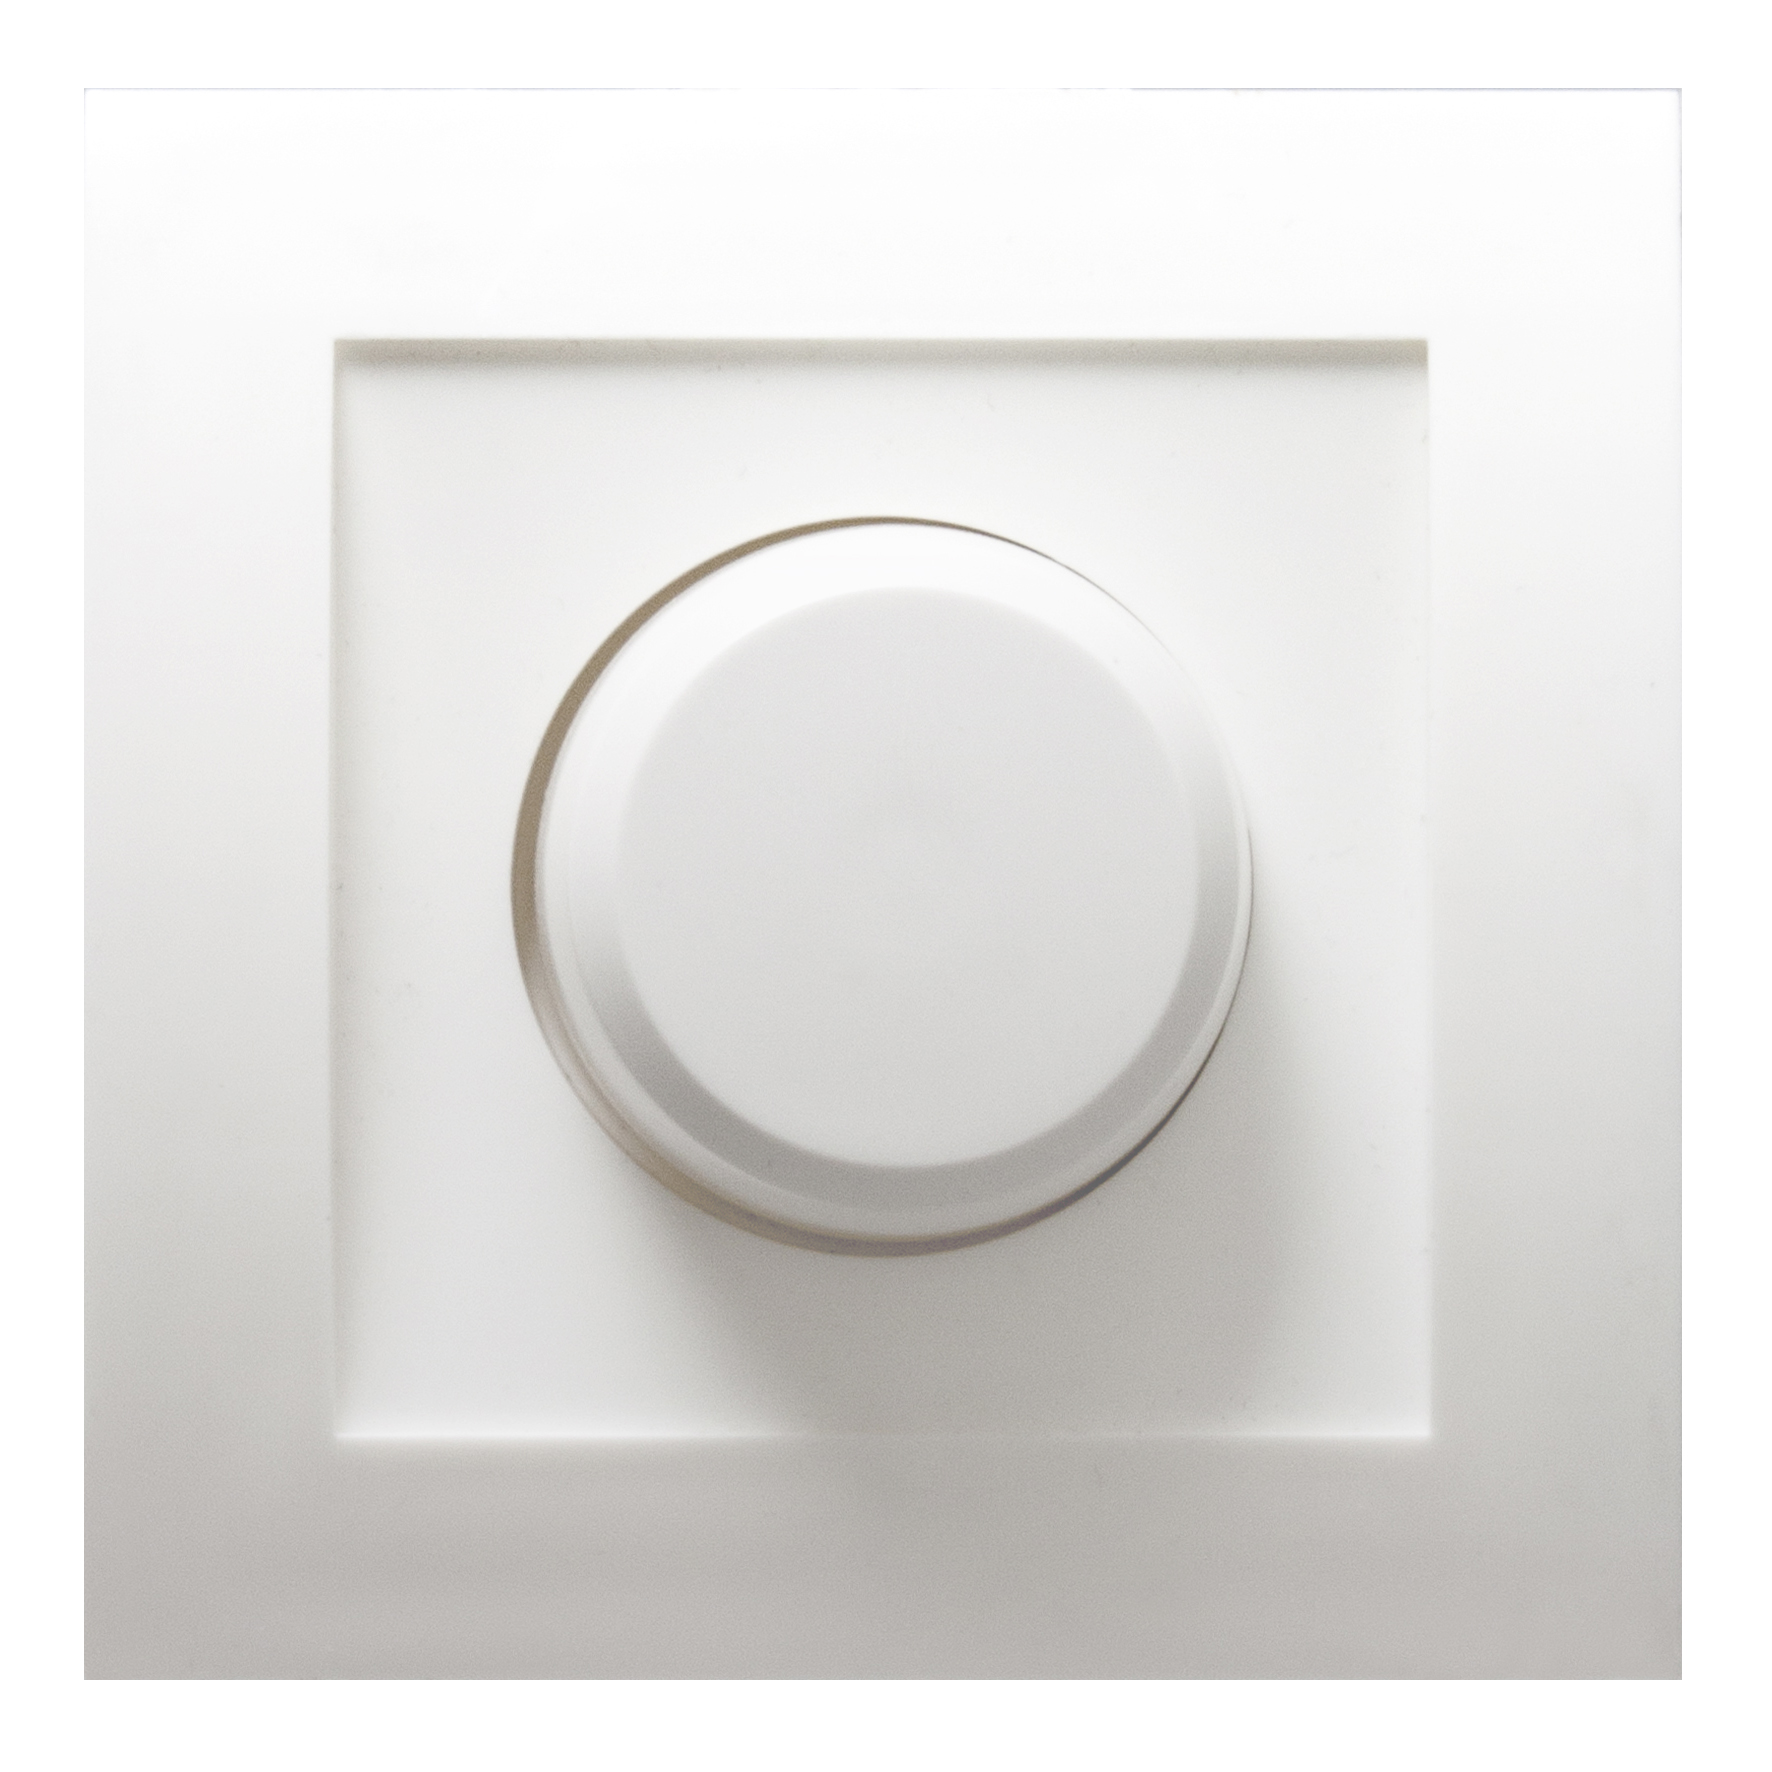 Single White Cover with Knob